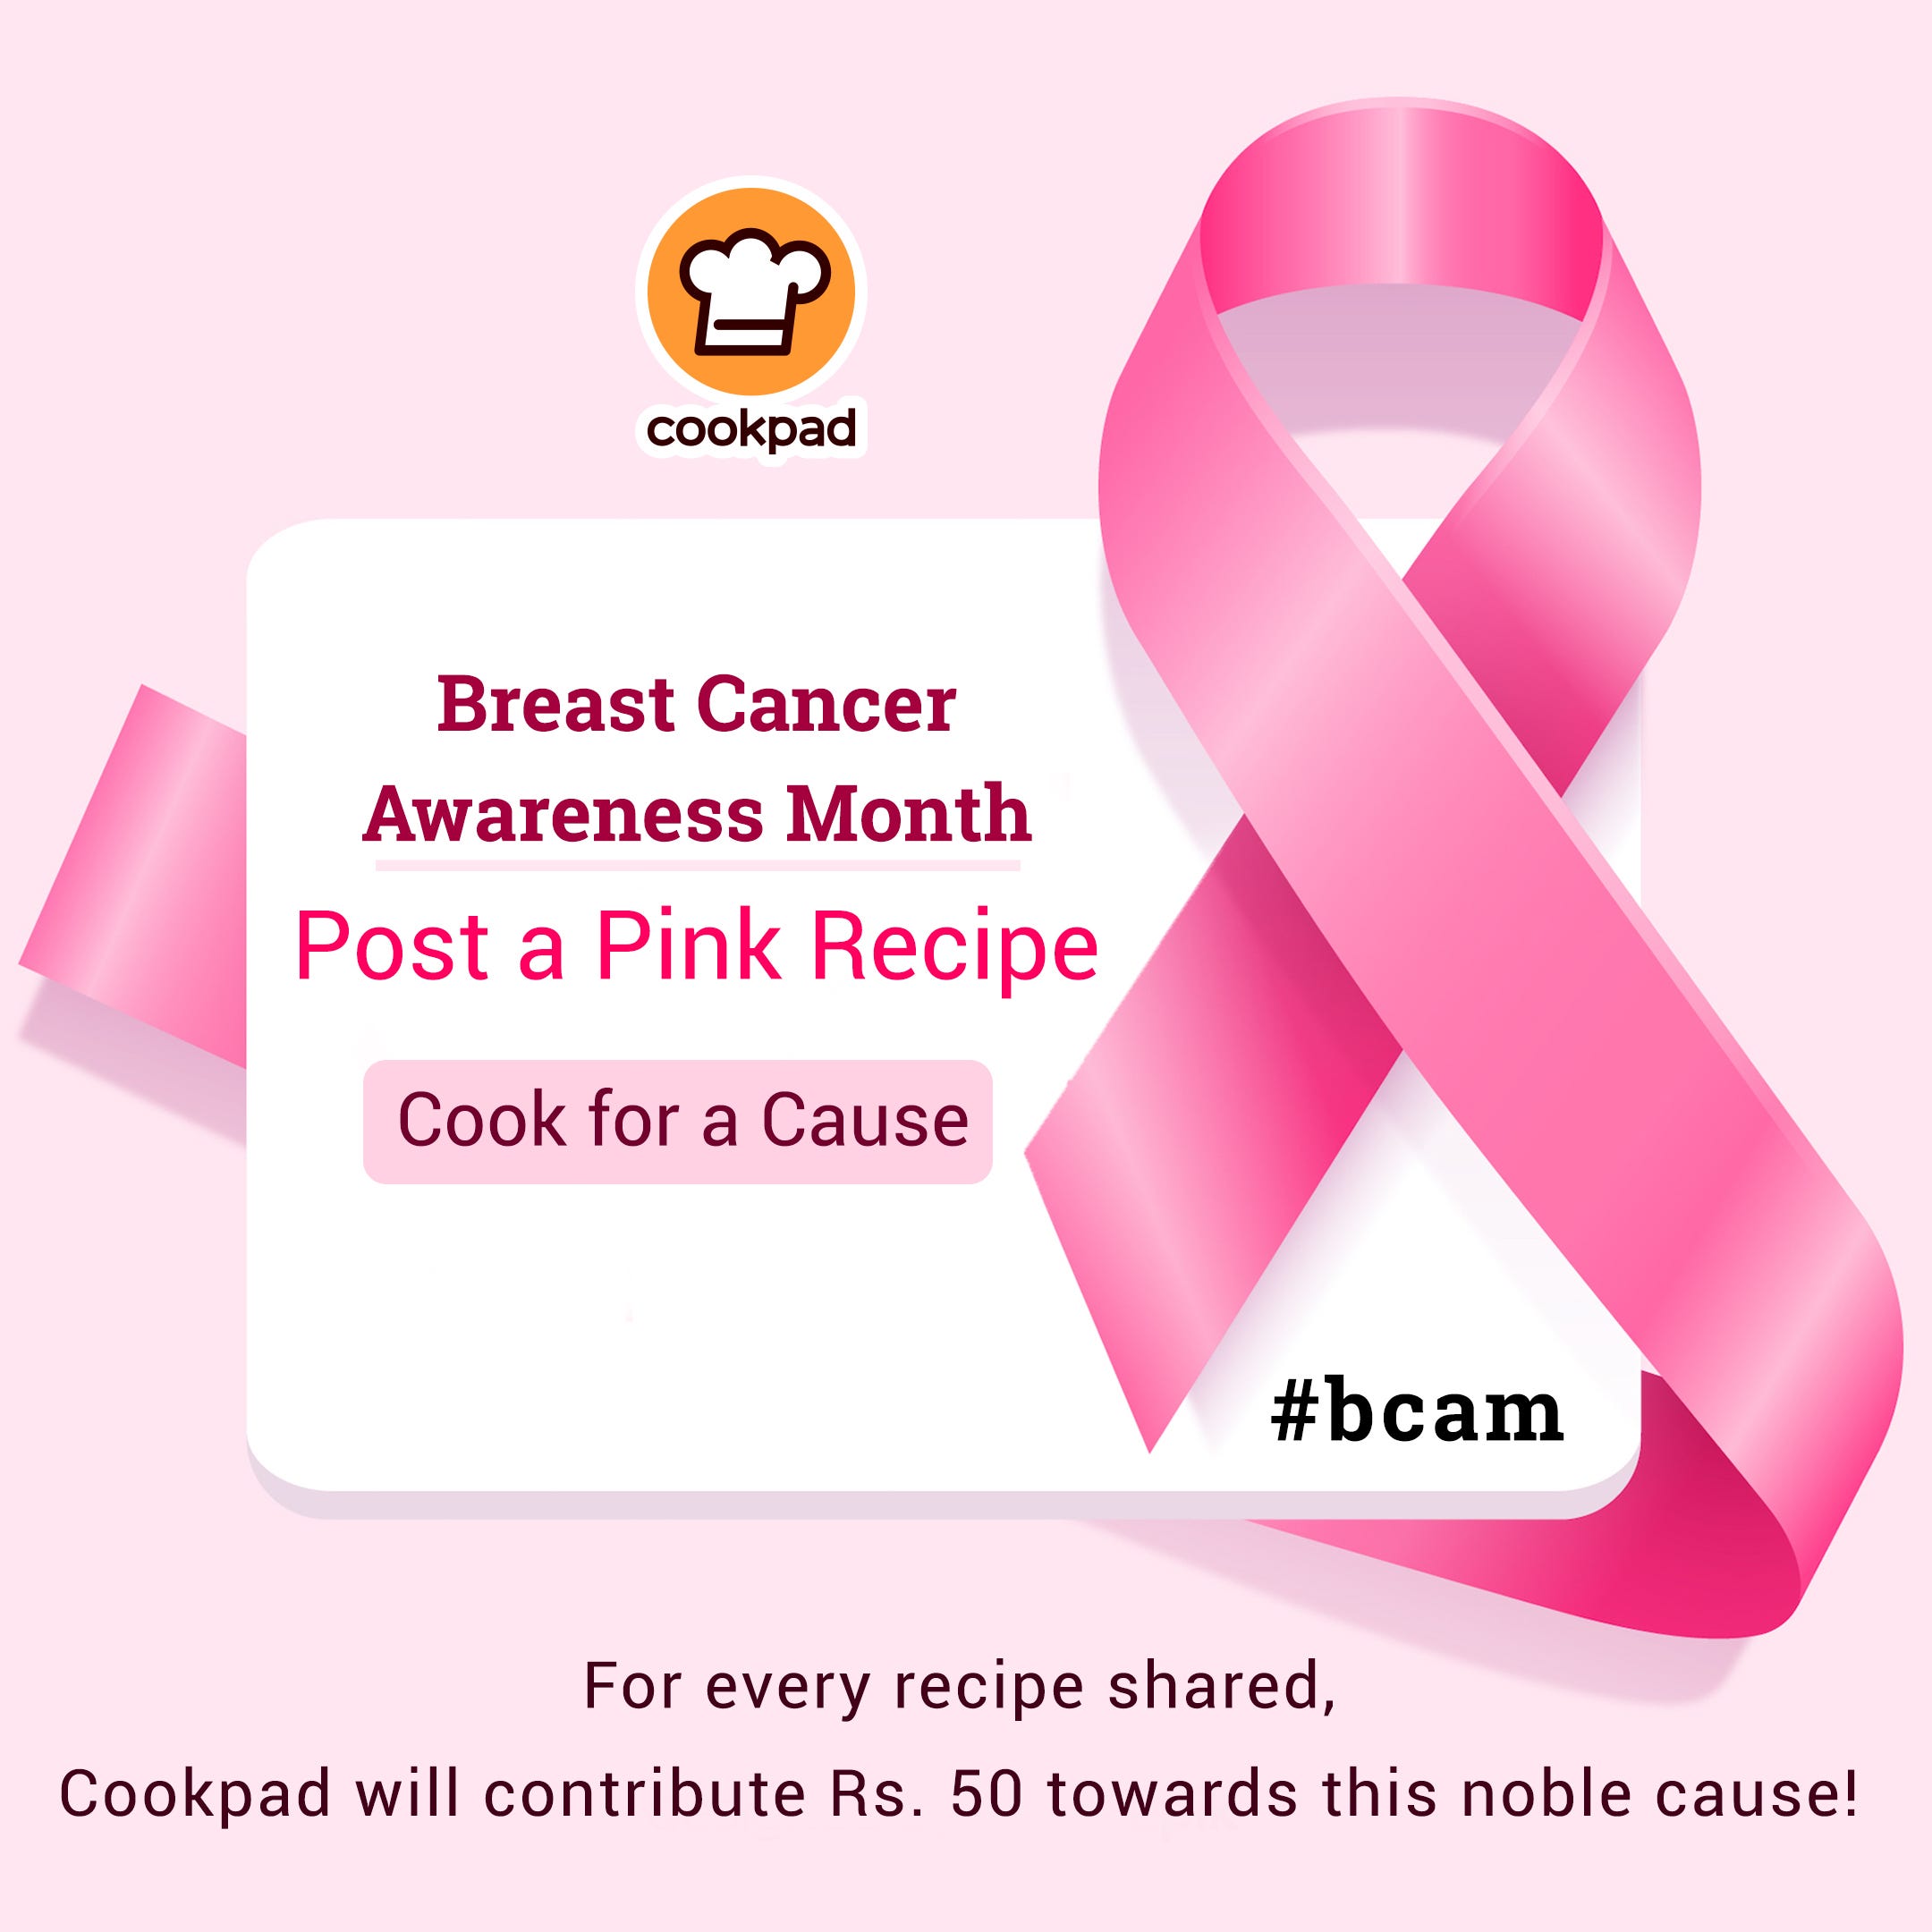 Breast Cancer Awareness Month Cookpad India Blog